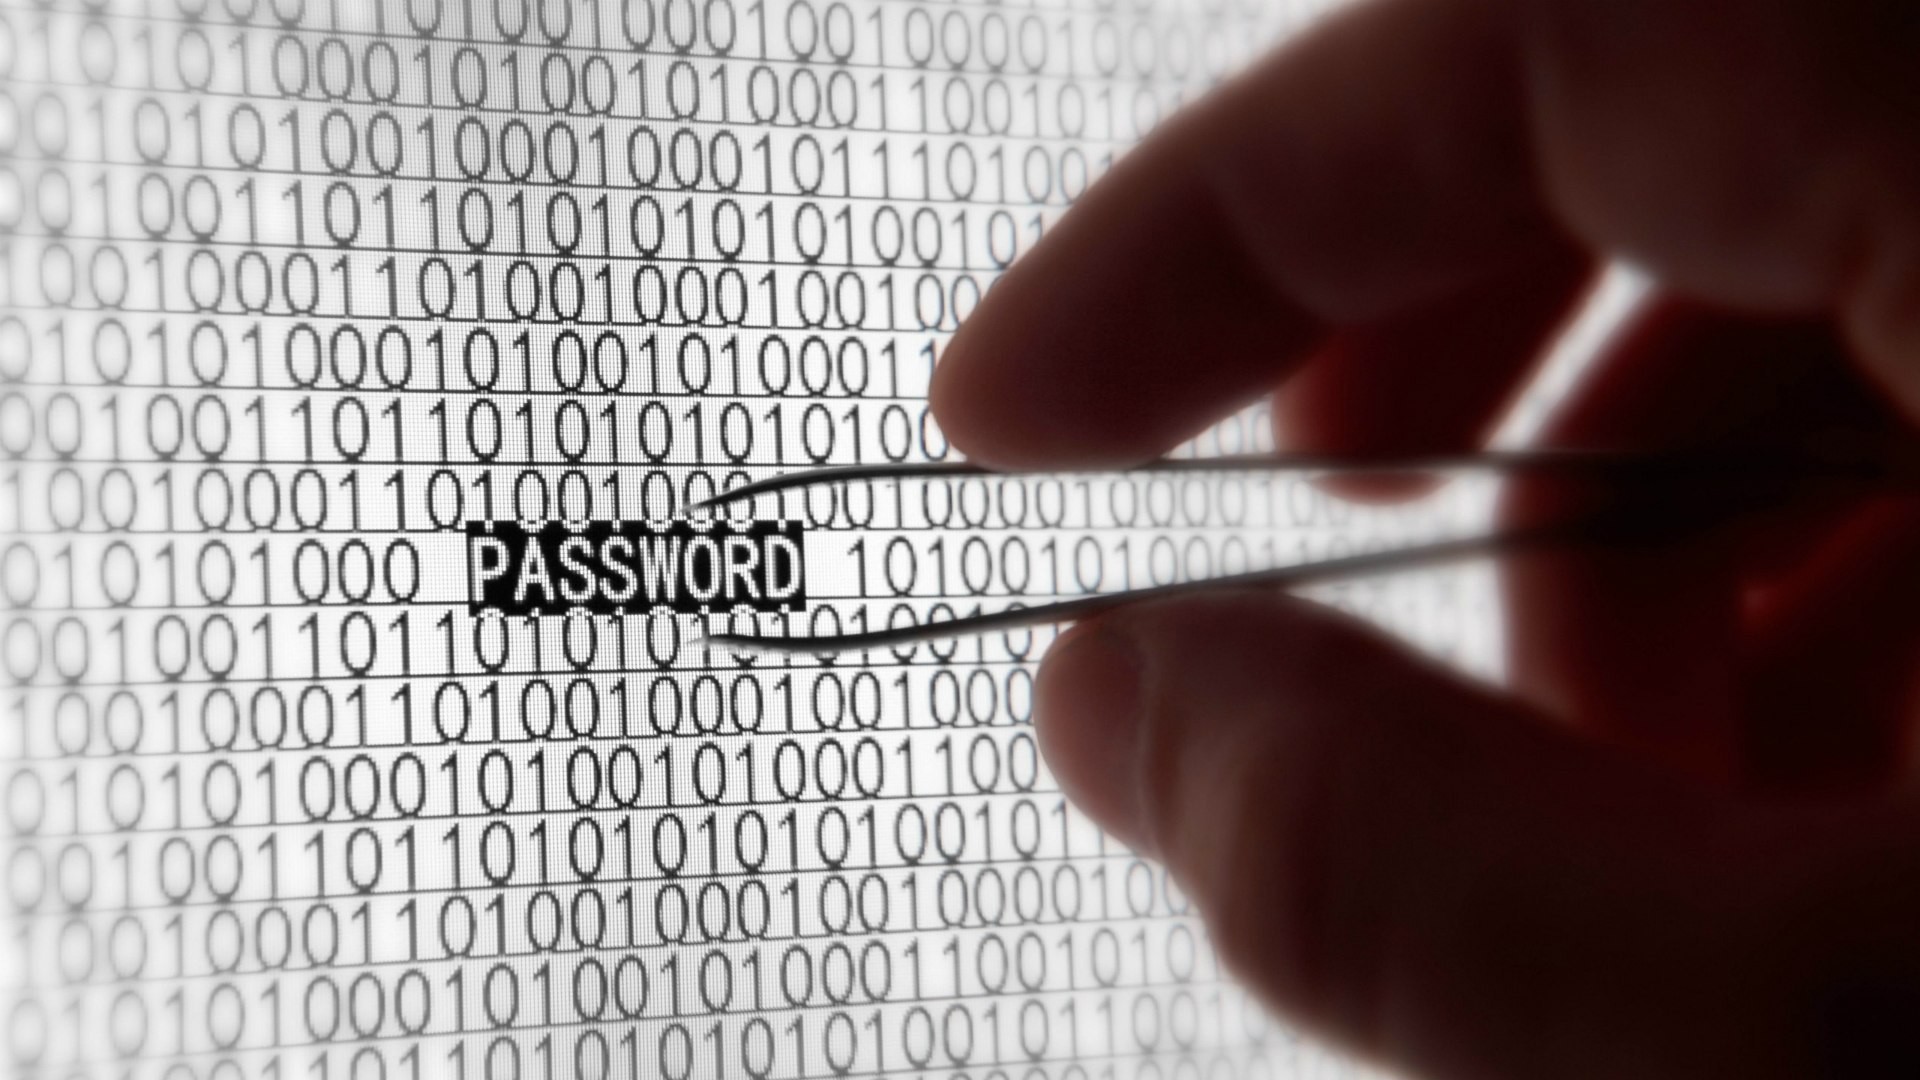 1920x1080 Sophisticated hacking password wallpapers and images - wallpapers,  pictures, photos